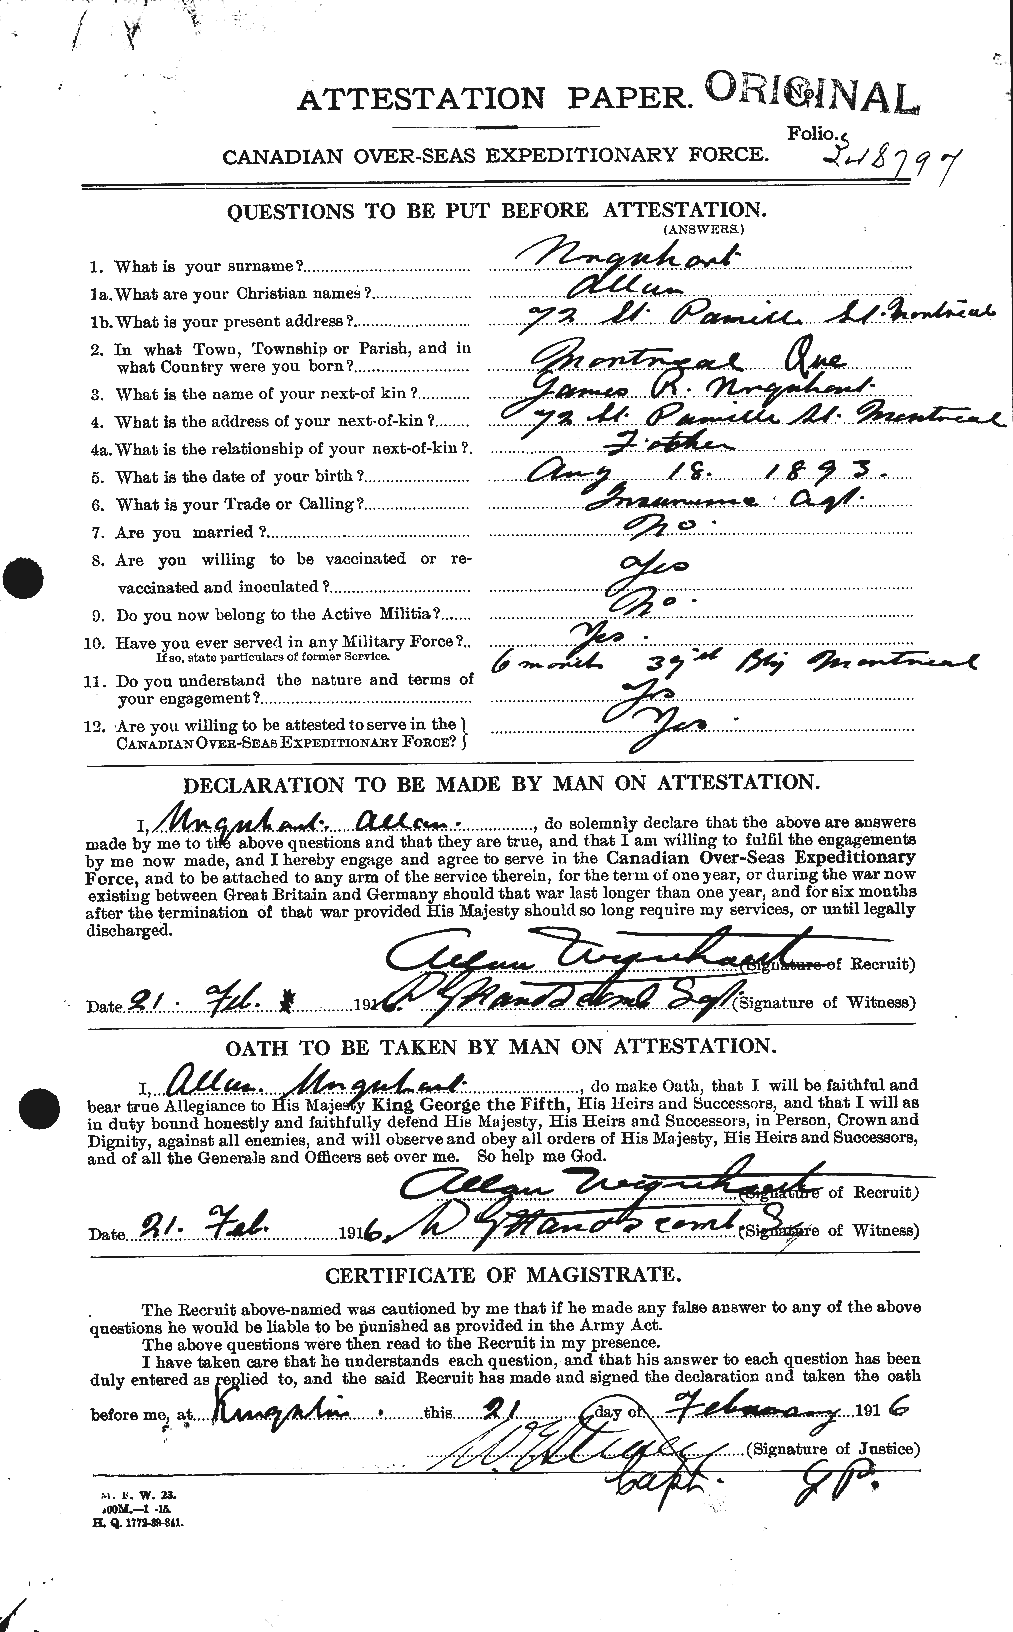 Personnel Records of the First World War - CEF 643293a